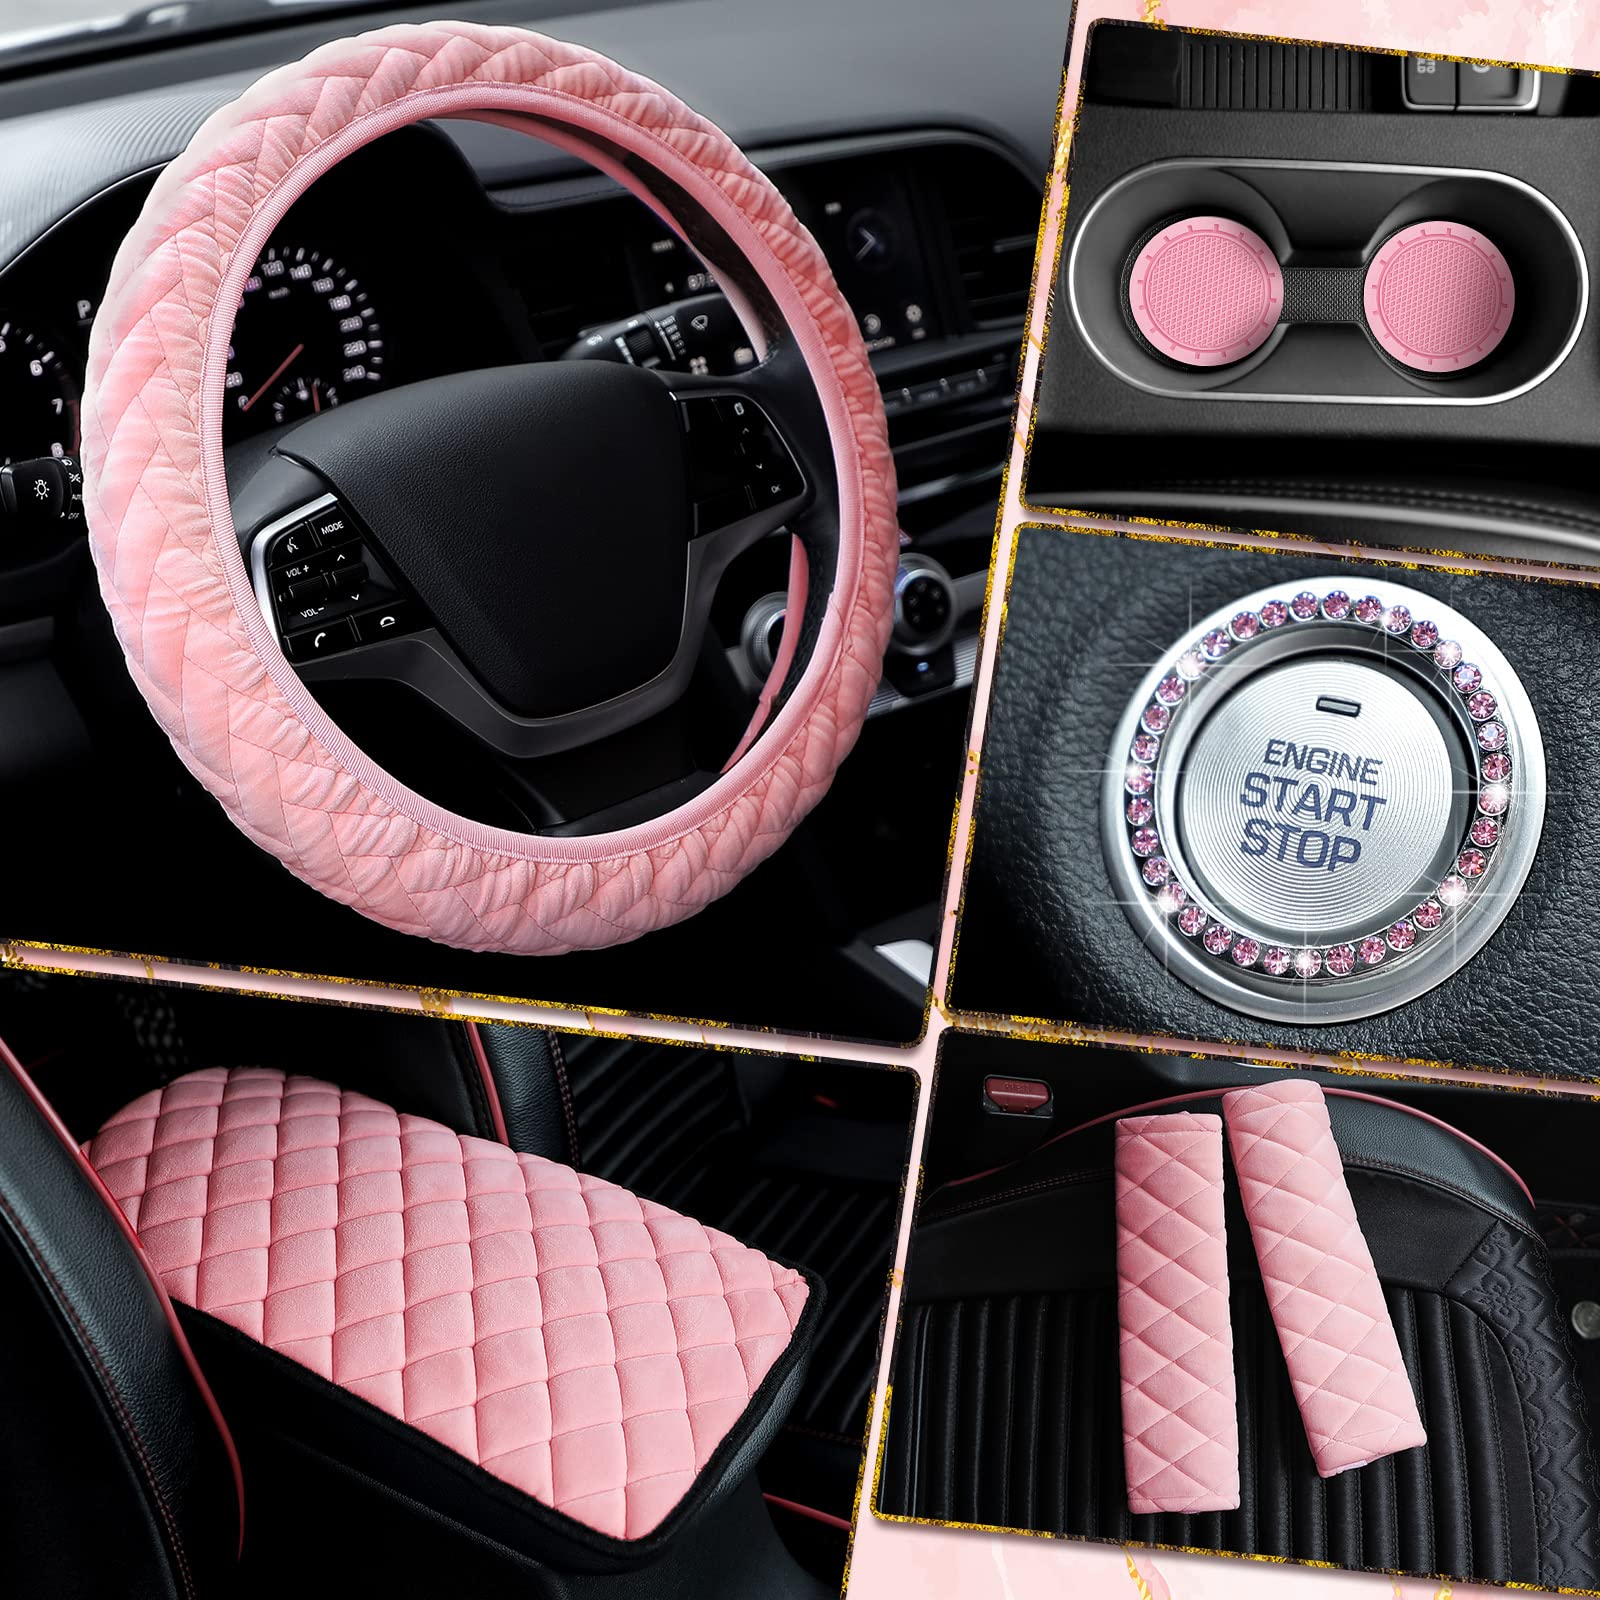 Cute Car Accessories: Adding Personality and Style to Your Ride